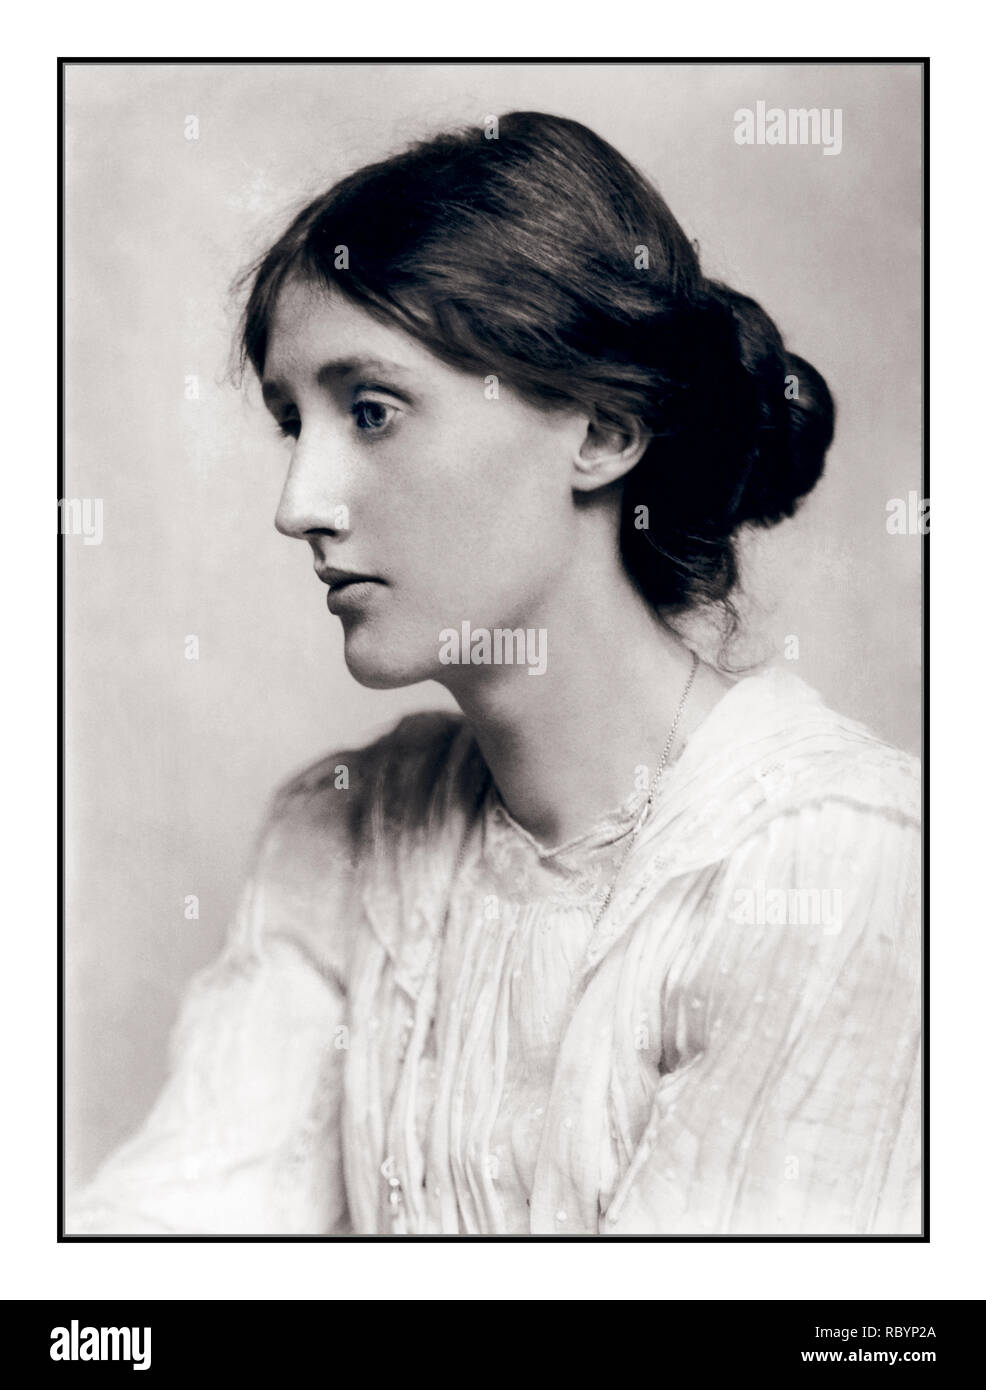 VIRGINIA WOOLF Archive B&W 1900’s Temperate wistful portrait of Virginia Woolf (January 25, 1882 – March 28, 1941), a British author and feminist, with her chignon. Stock Photo